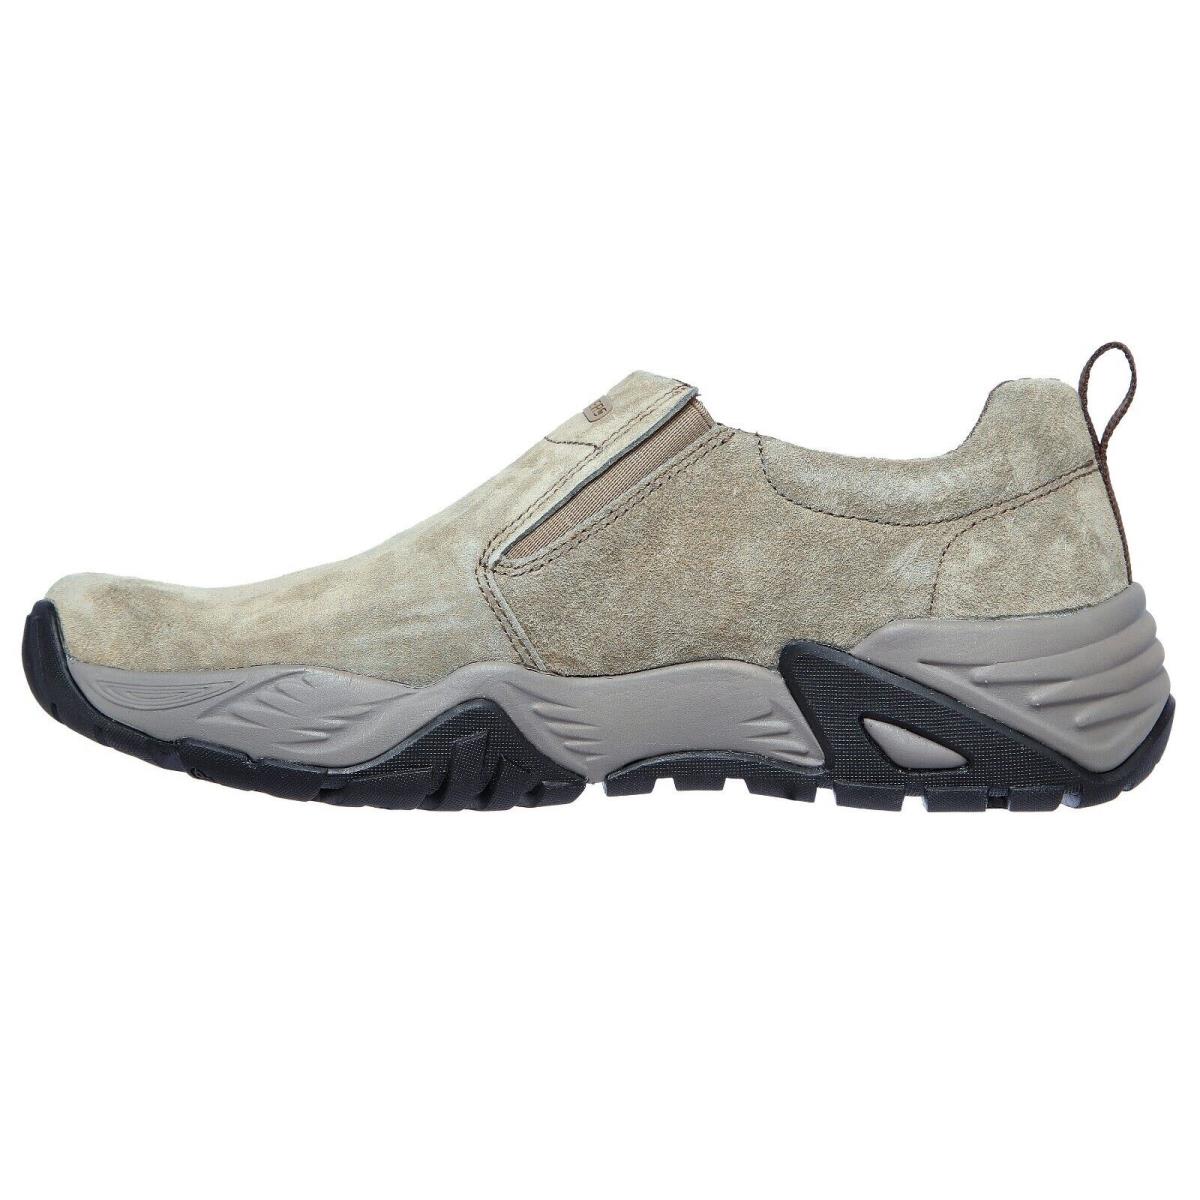 Skechers shoes Recon Sandro - Taupe 7